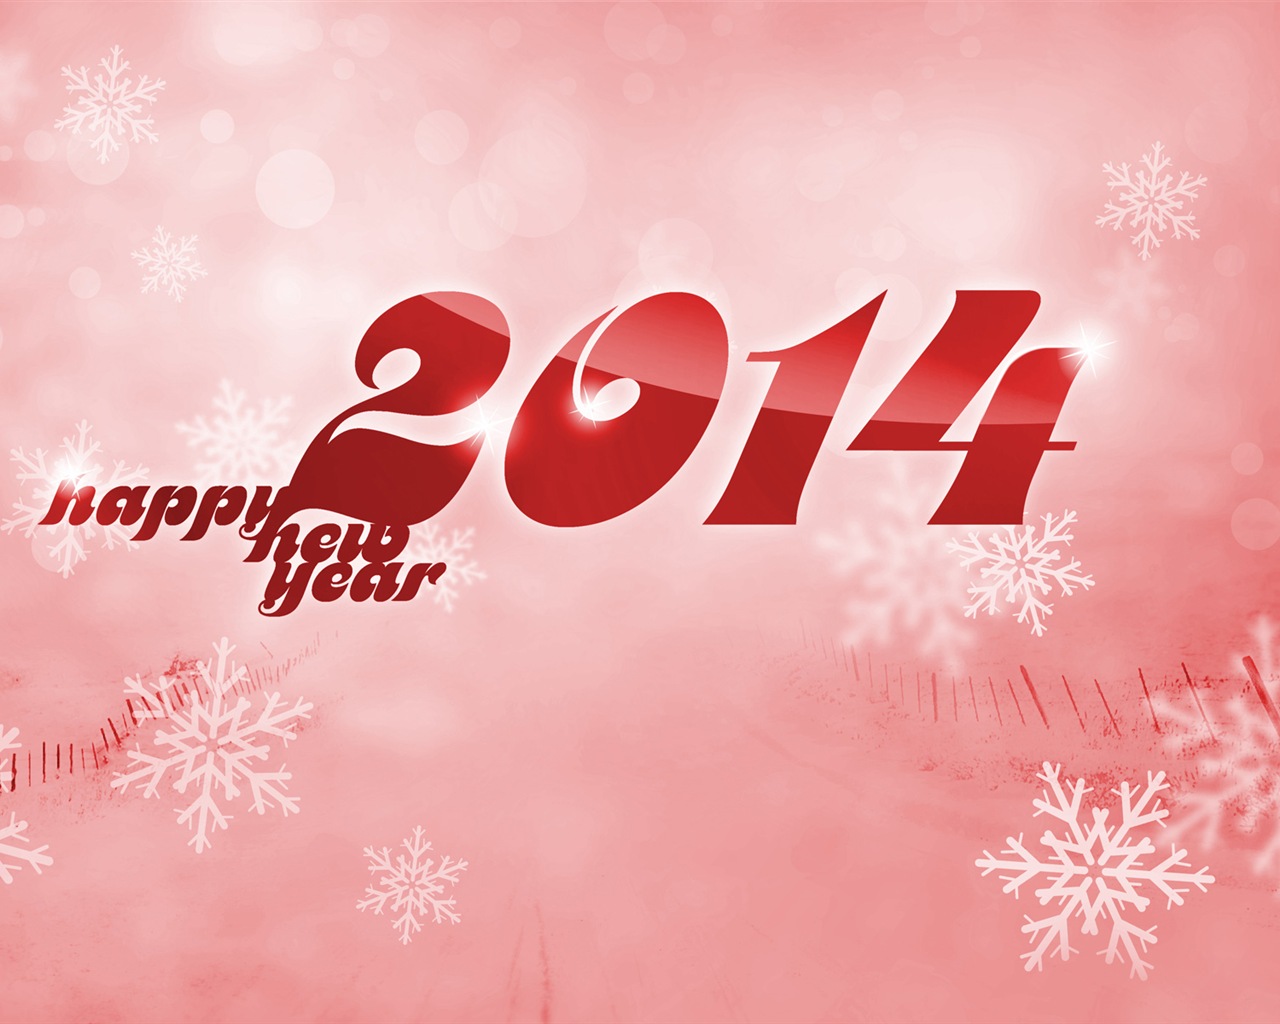 2014 New Year Theme HD Wallpapers (1) #12 - 1280x1024